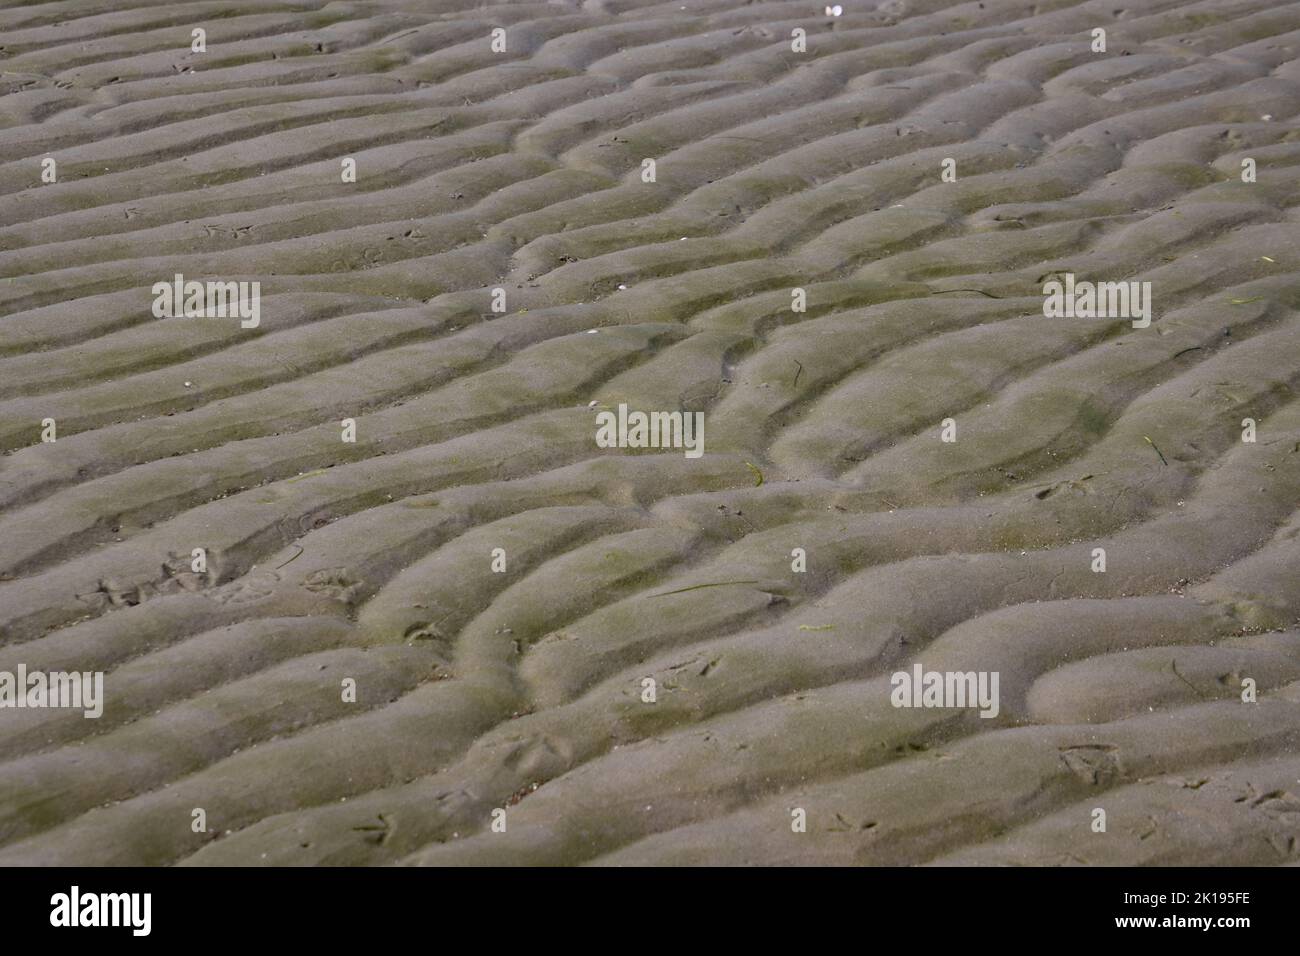 Wet abstract sand pattern for background Stock Photo